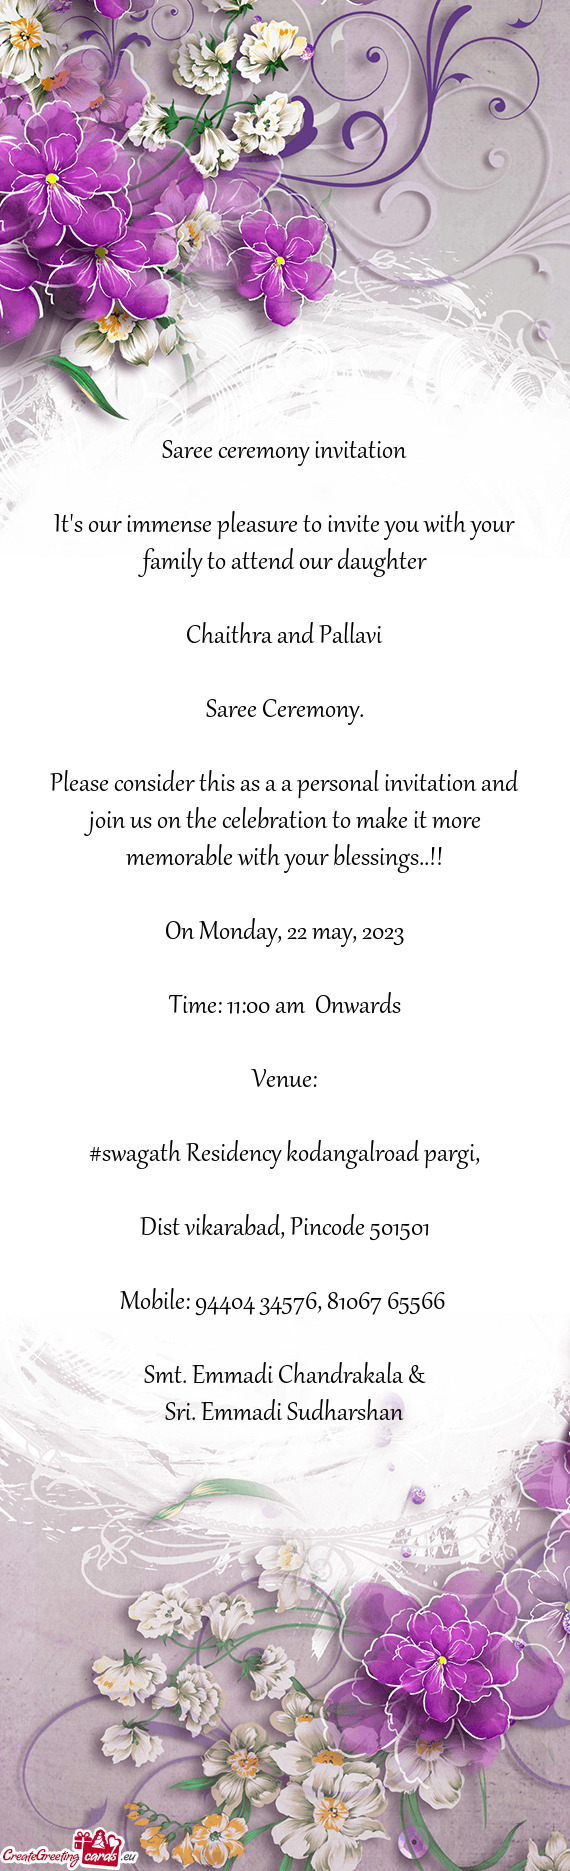 Please consider this as a a personal invitation and join us on the celebration to make it more memor